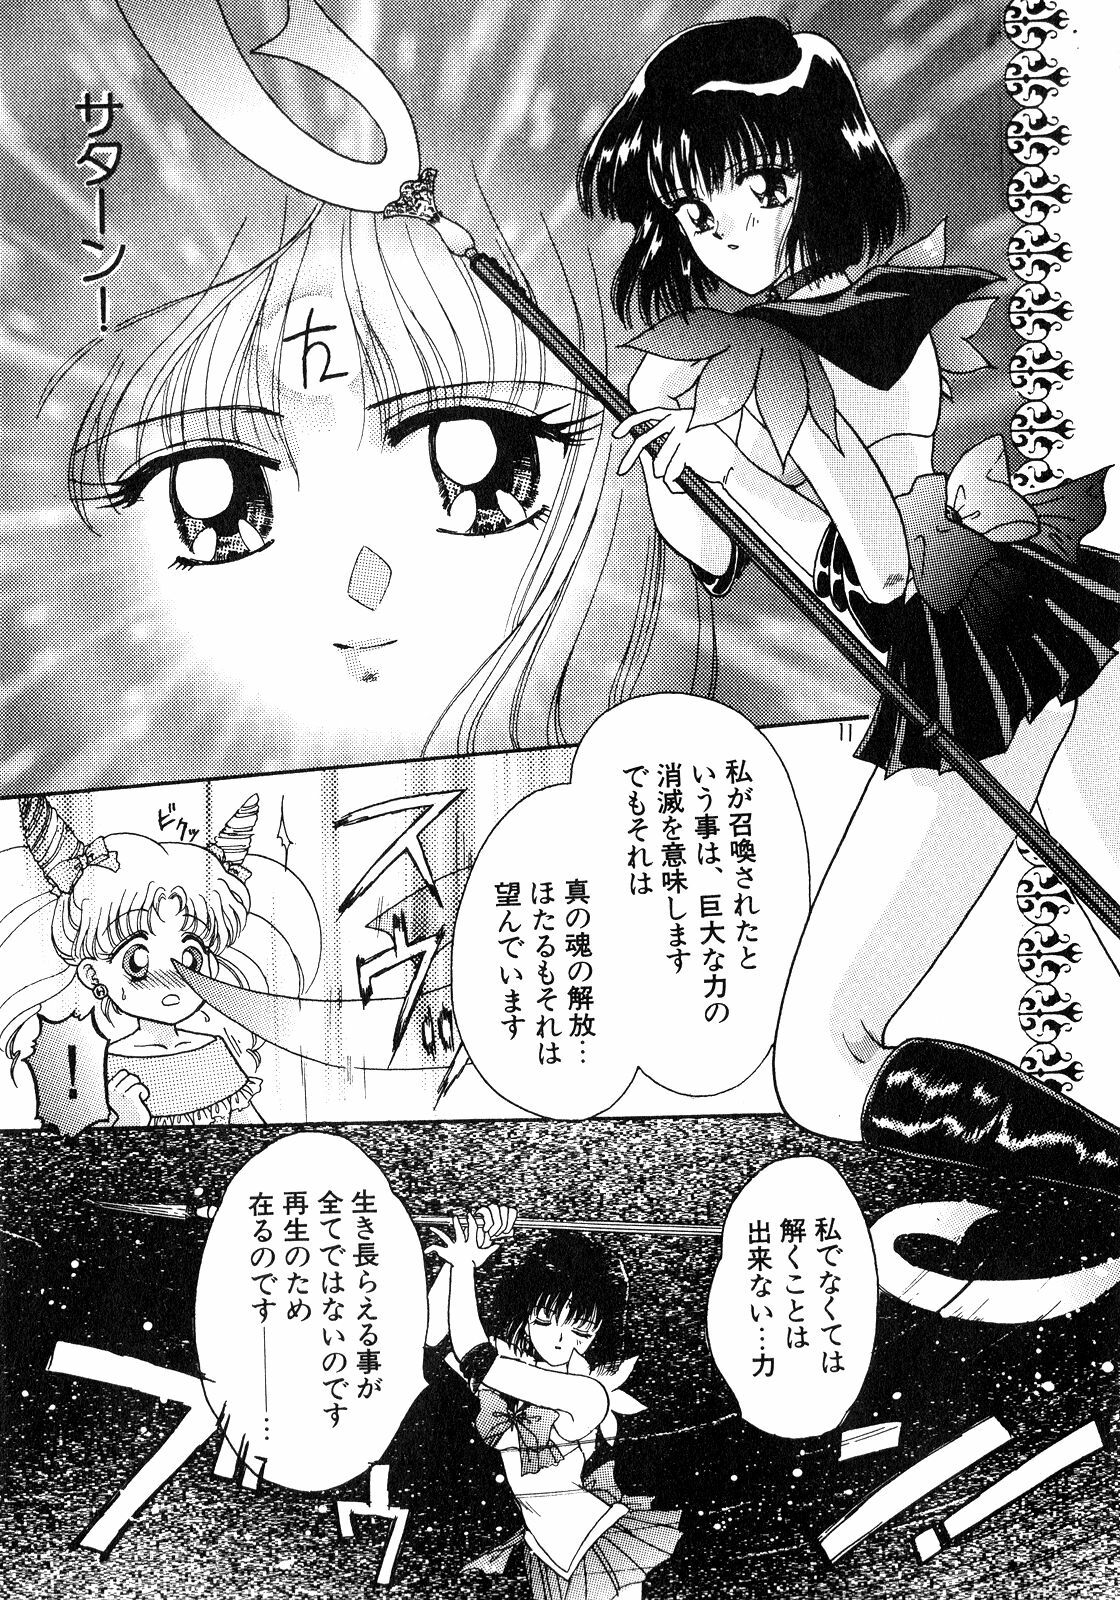 [Anthology] Lunatic Party 8 (Sailor Moon) page 10 full